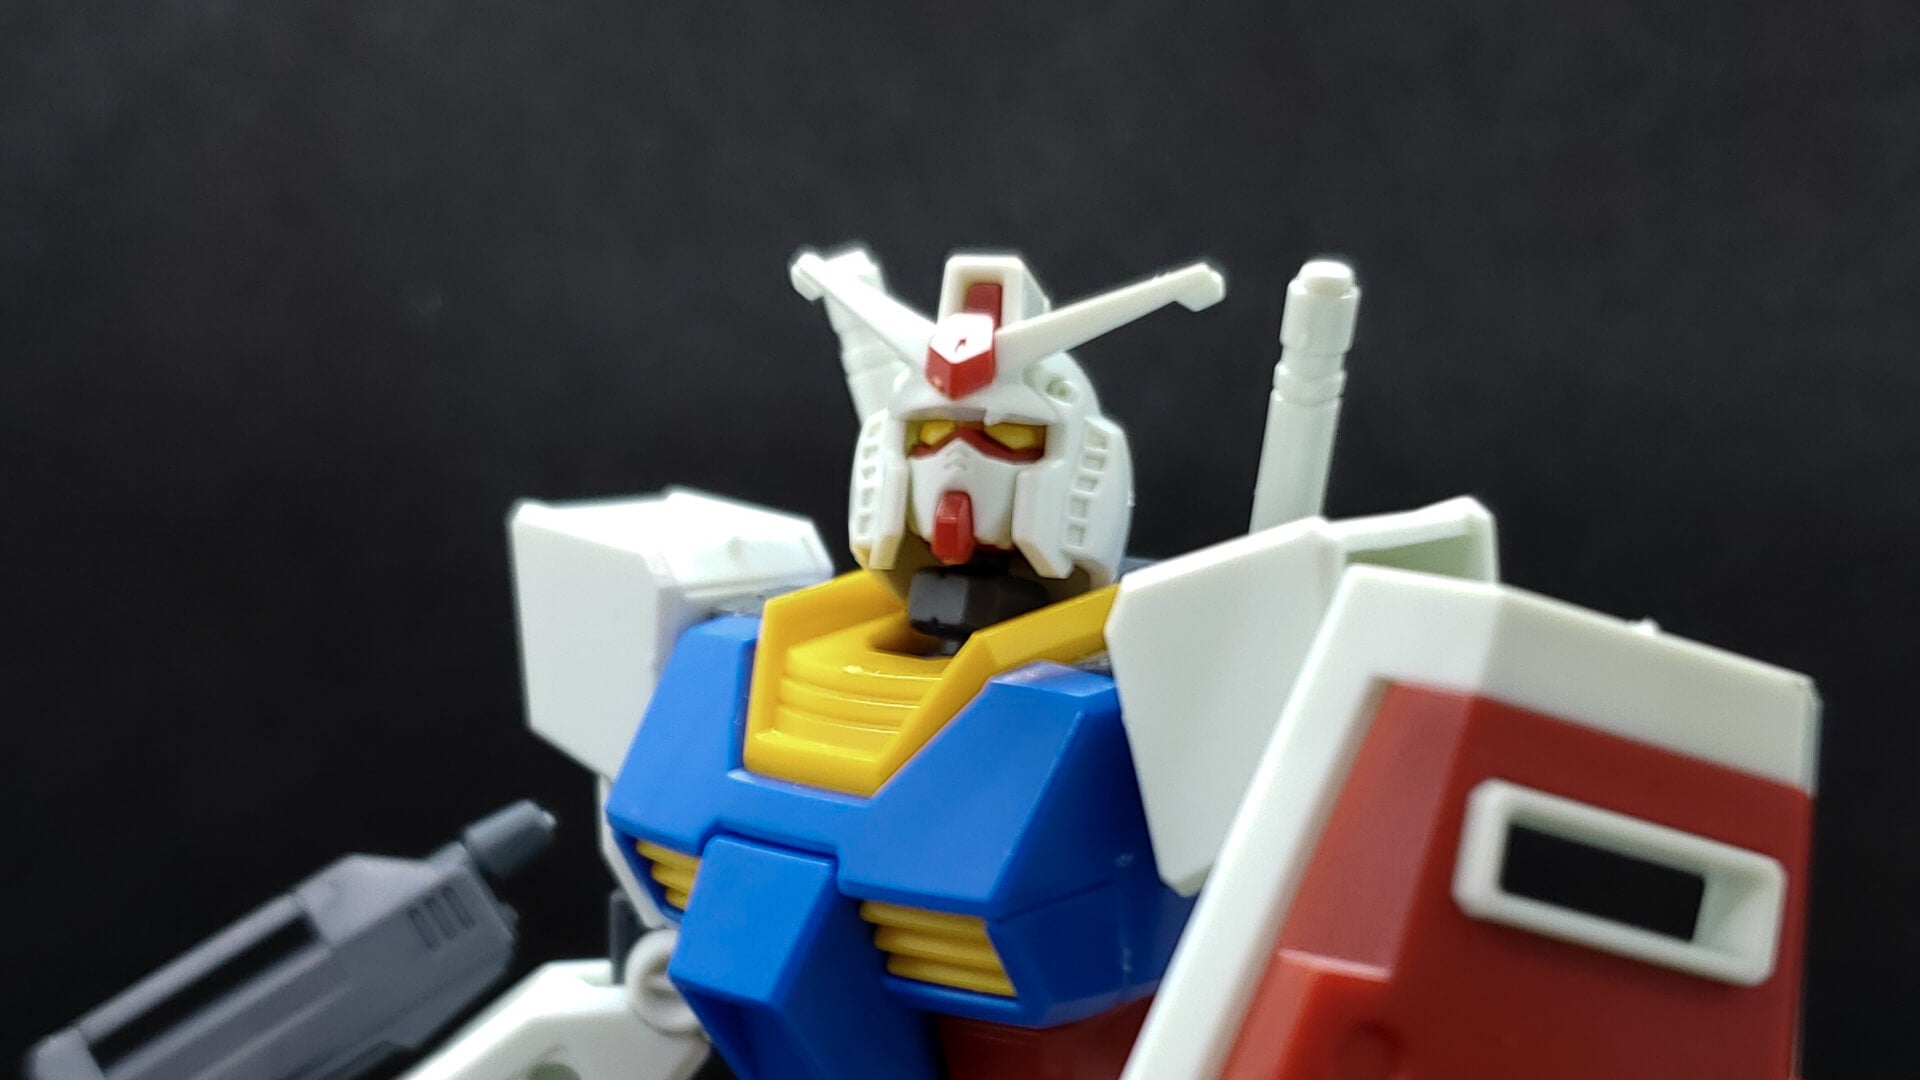 REVIEW: How Good is the Entry Grade RX-78-2?